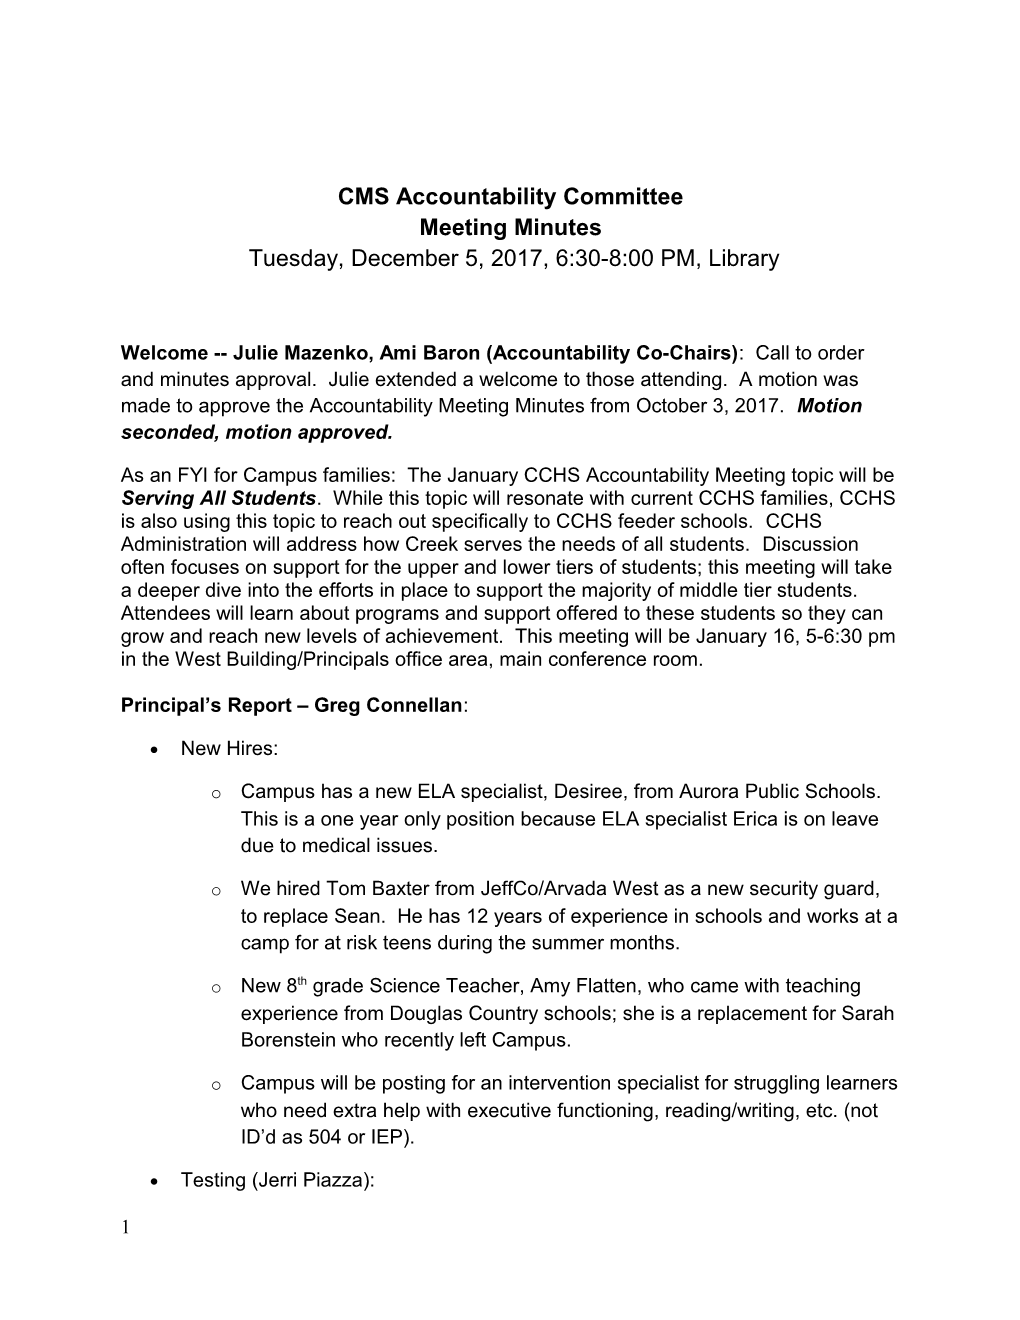 CMS Accountability Committee s1